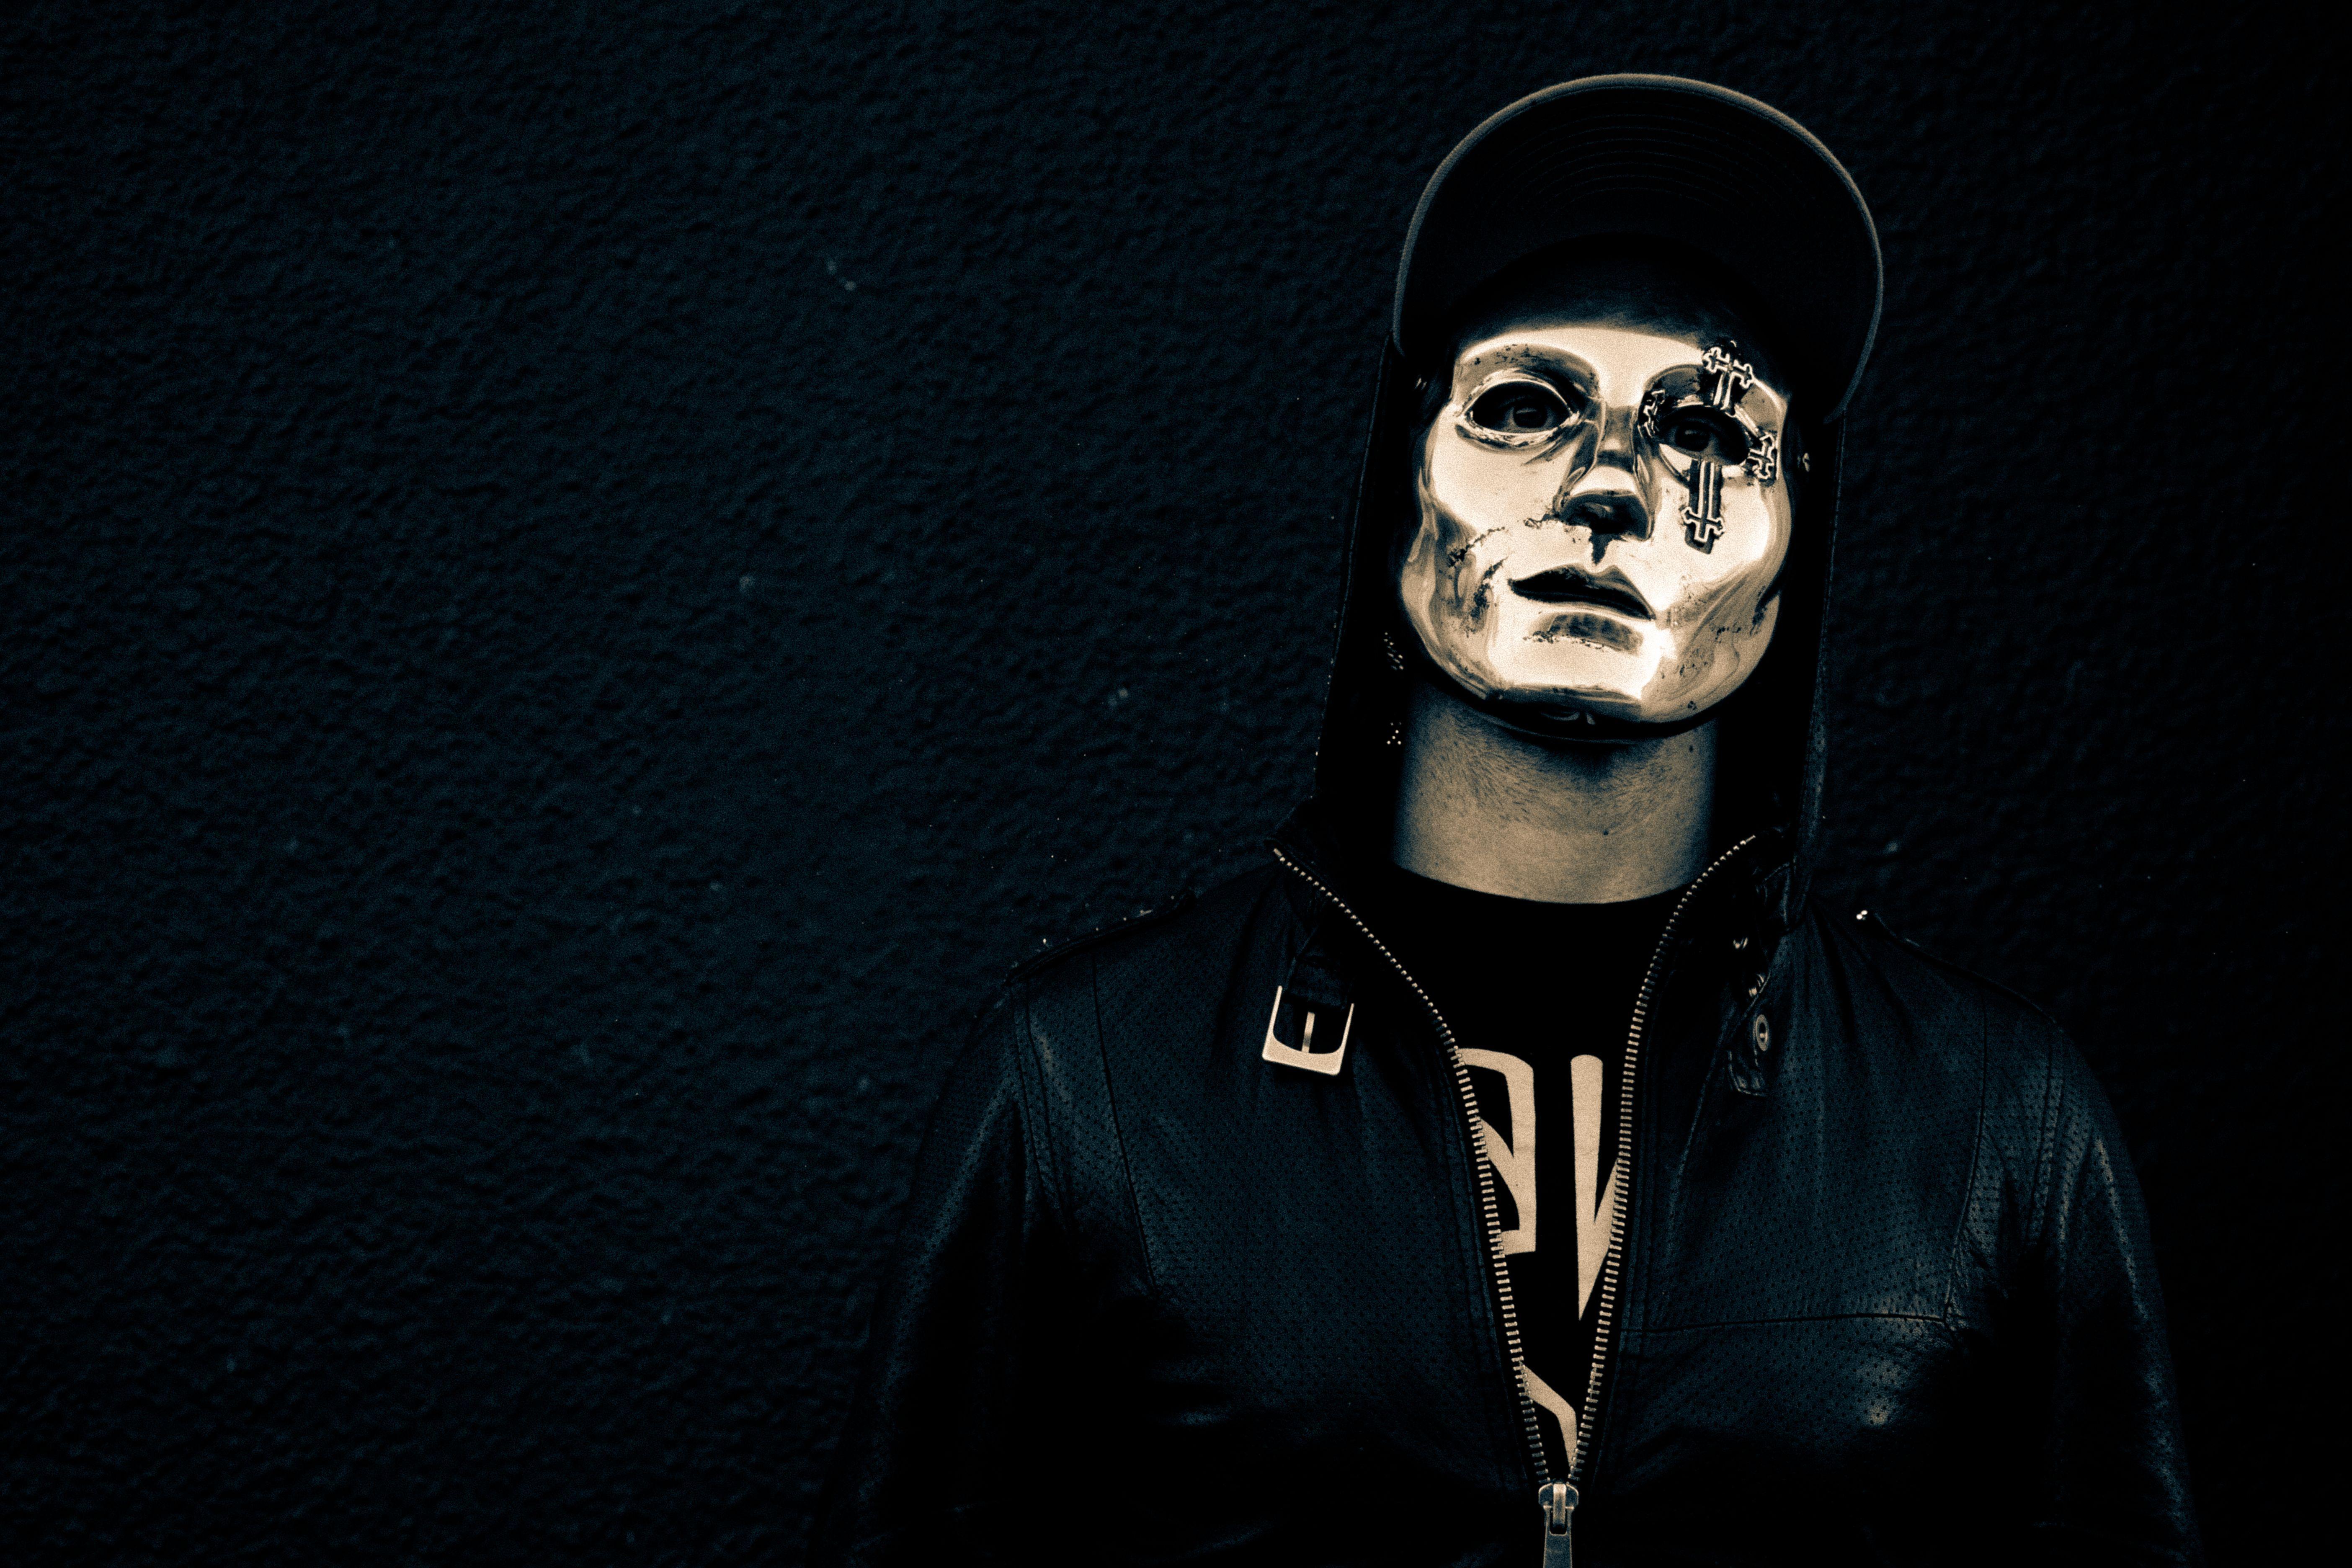 High Quality Hollywood Undead Wallpaper. Full HD Picture